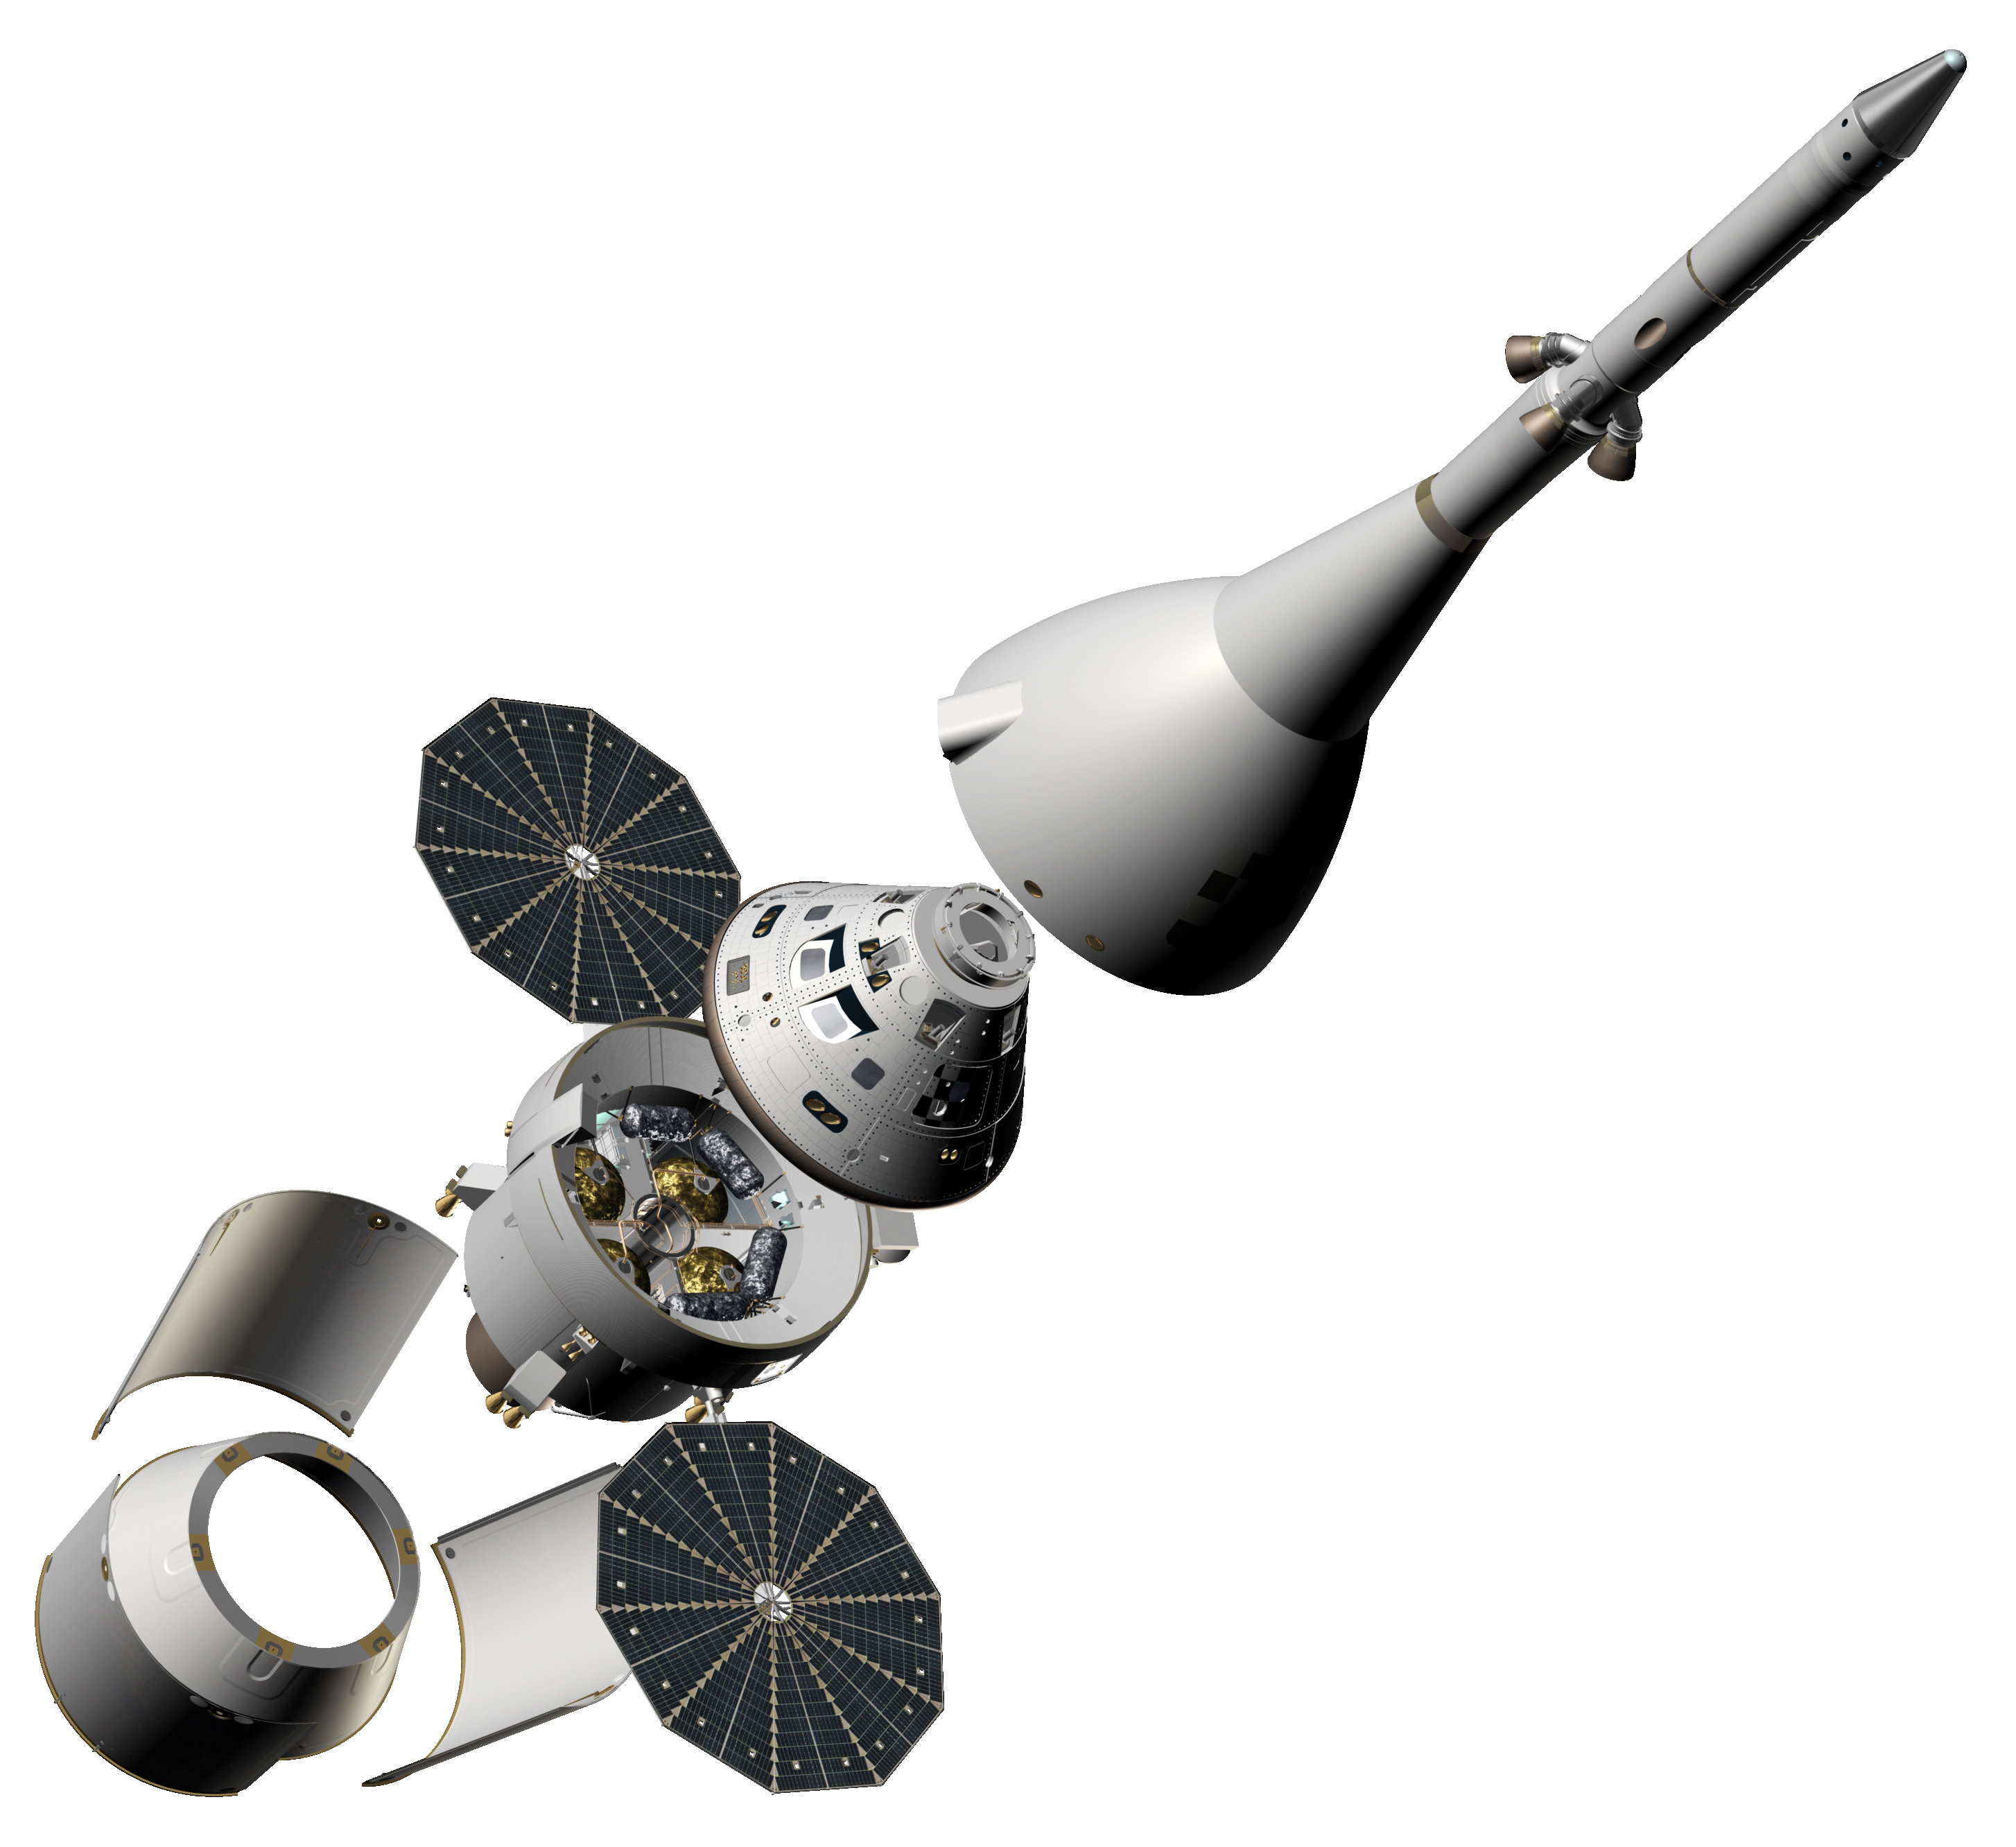 what are the dimensions of the orion spacecraft